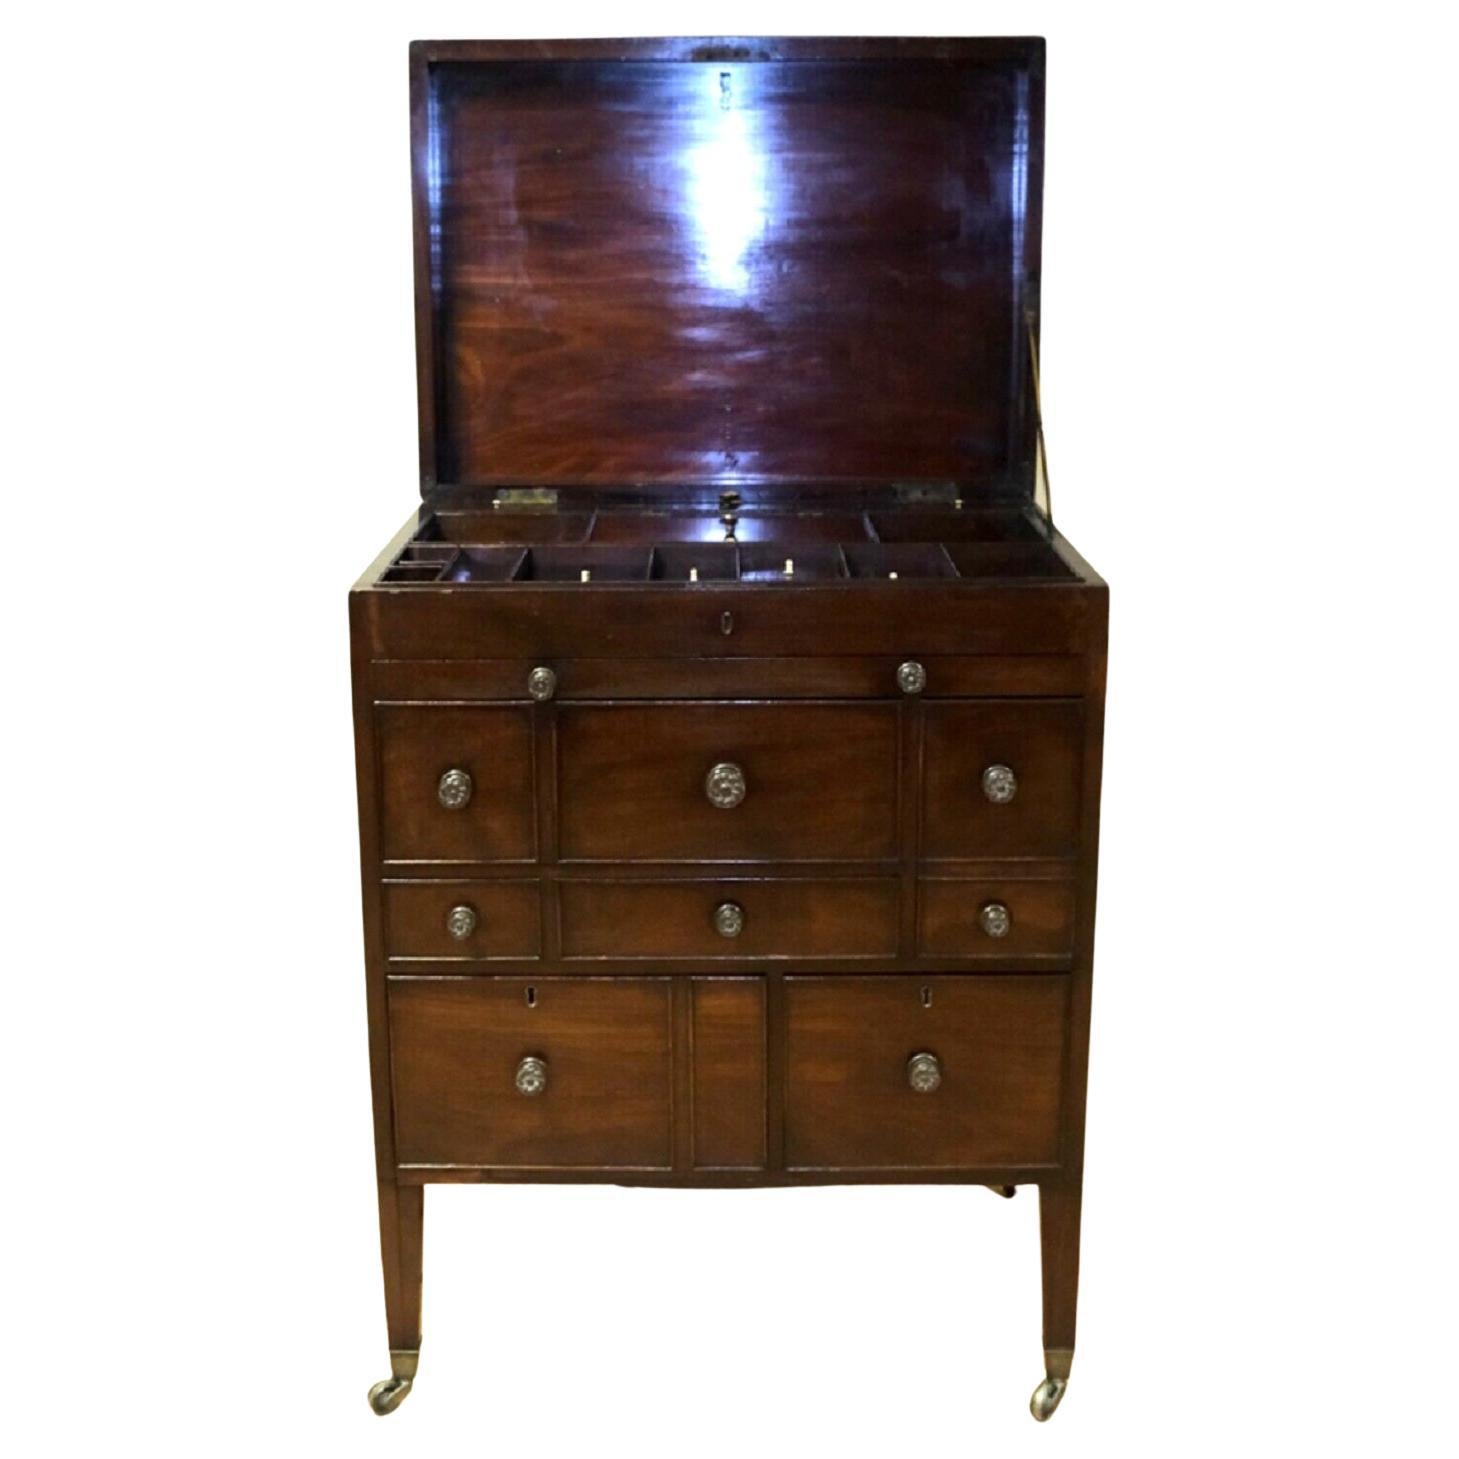 We are delighted to offer for sale this lovely late 18th Century Mahogany Officers Military Campaign traveling chest of drawers. 

To start, under the top there is the original mirror that can come out between the little compartments, this can be